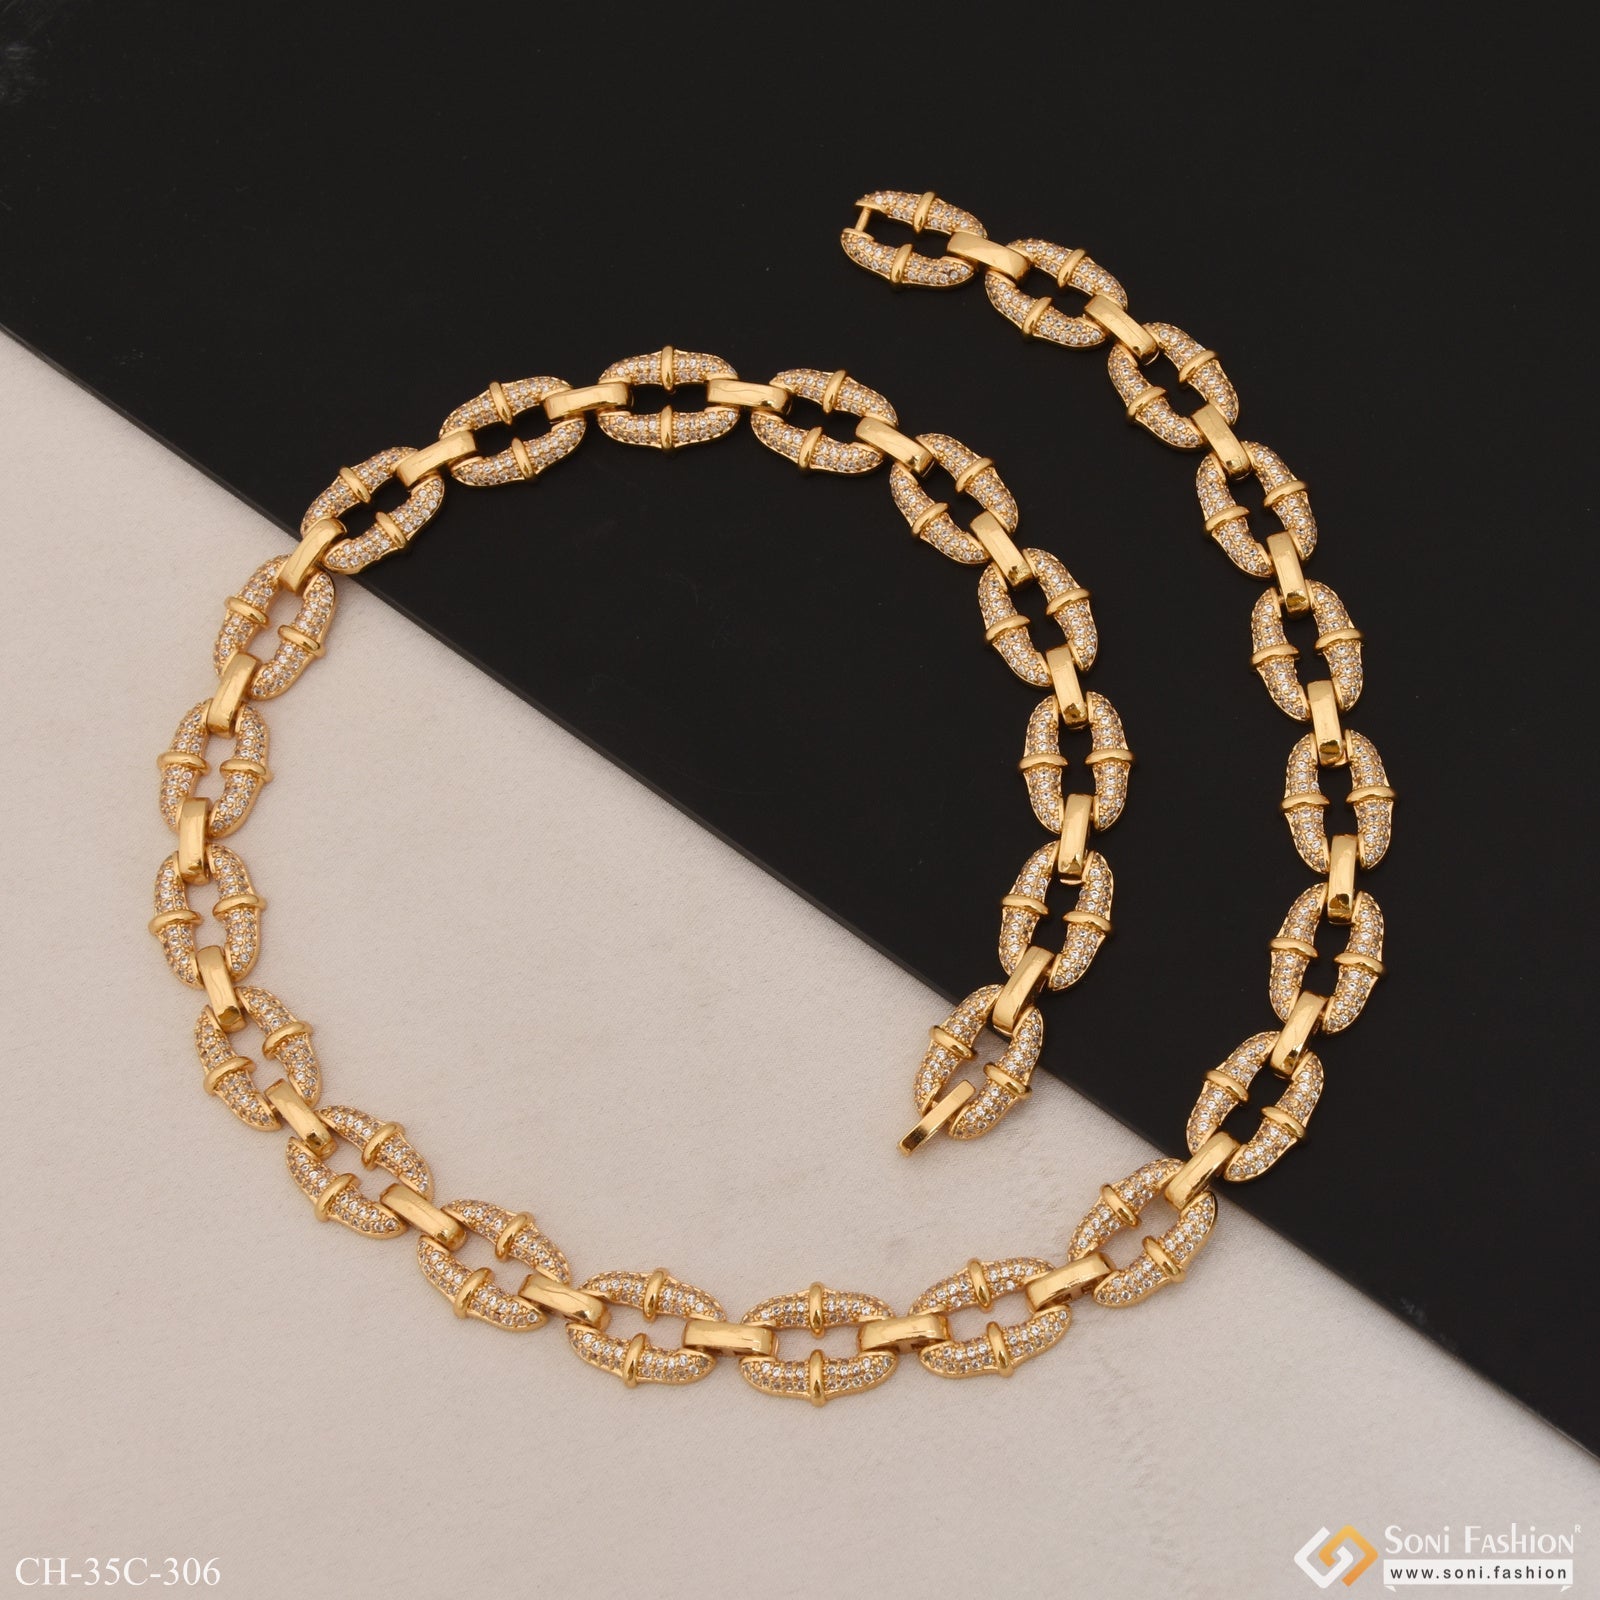 Attention-Getting Design with Diamond Fashionable Design Chain for Men - Style C306